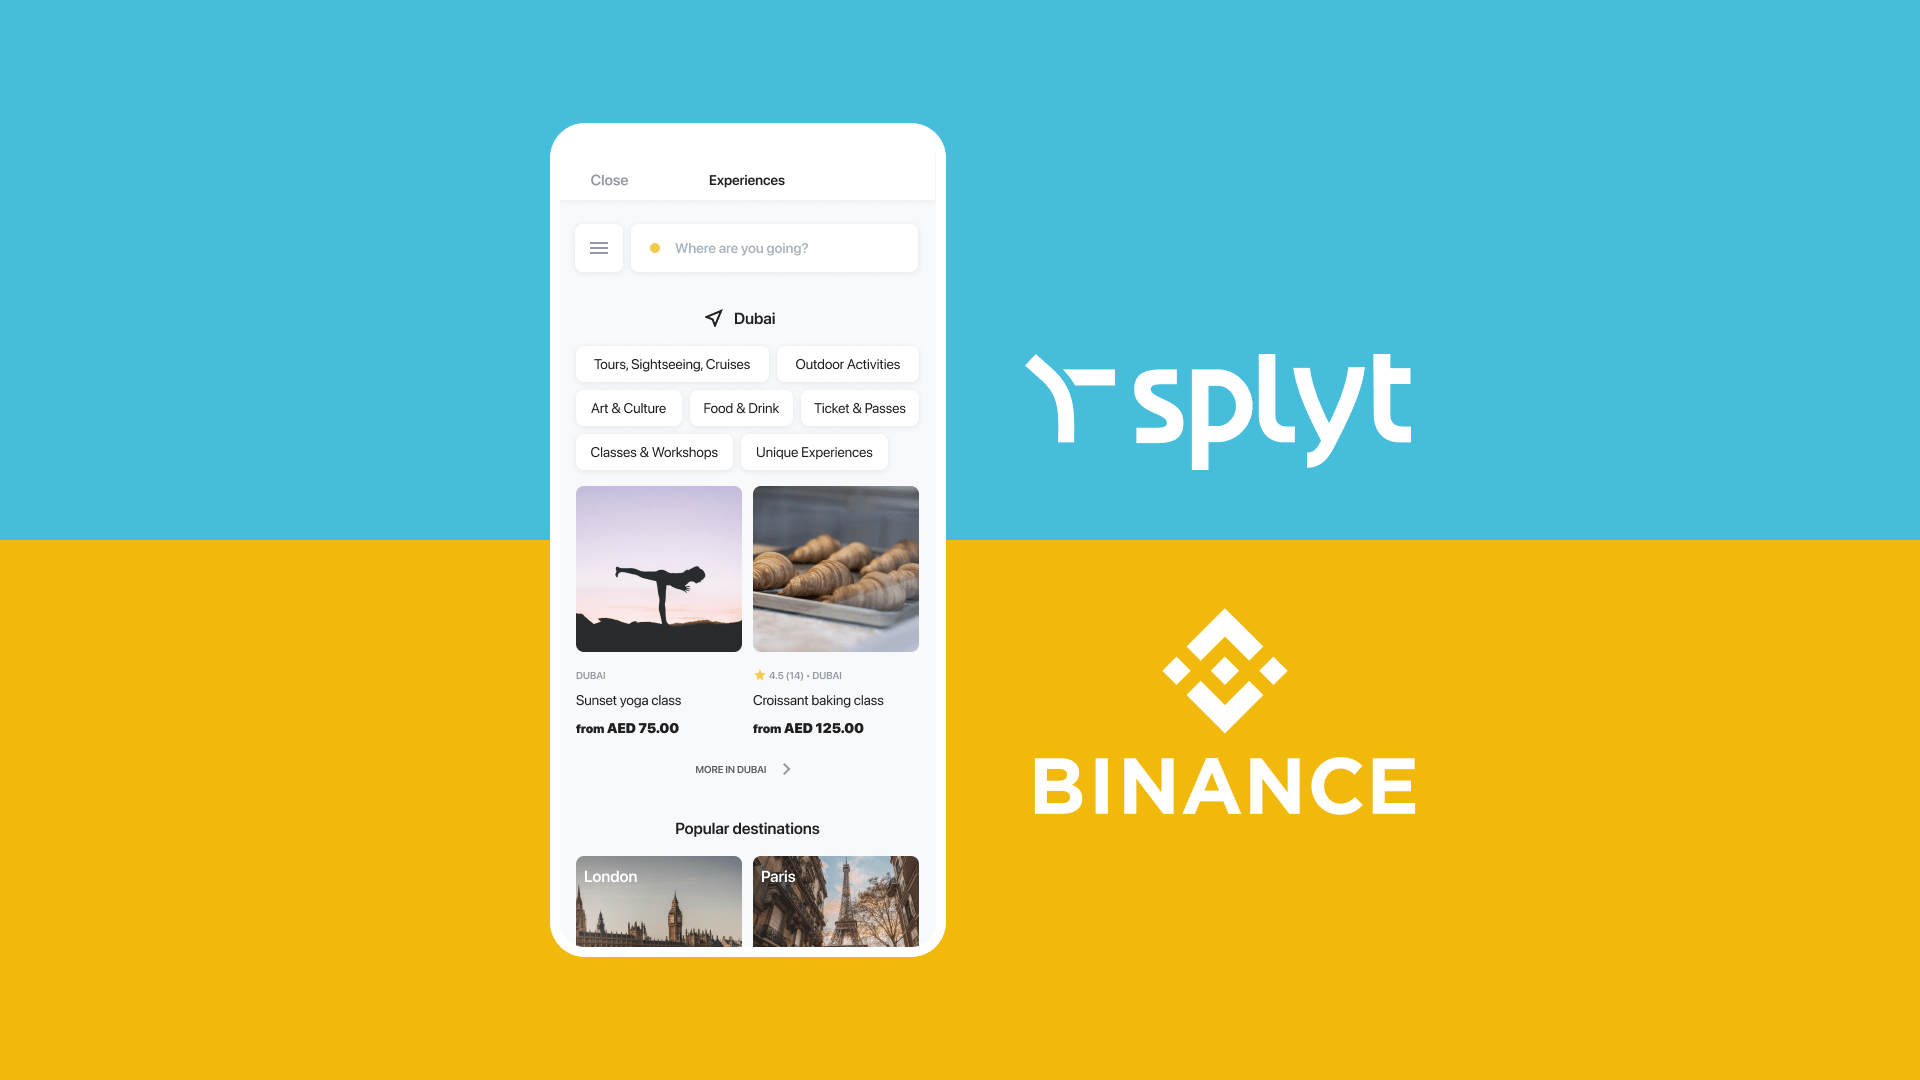 Binance Pay integrates Splyt ride-hailing services